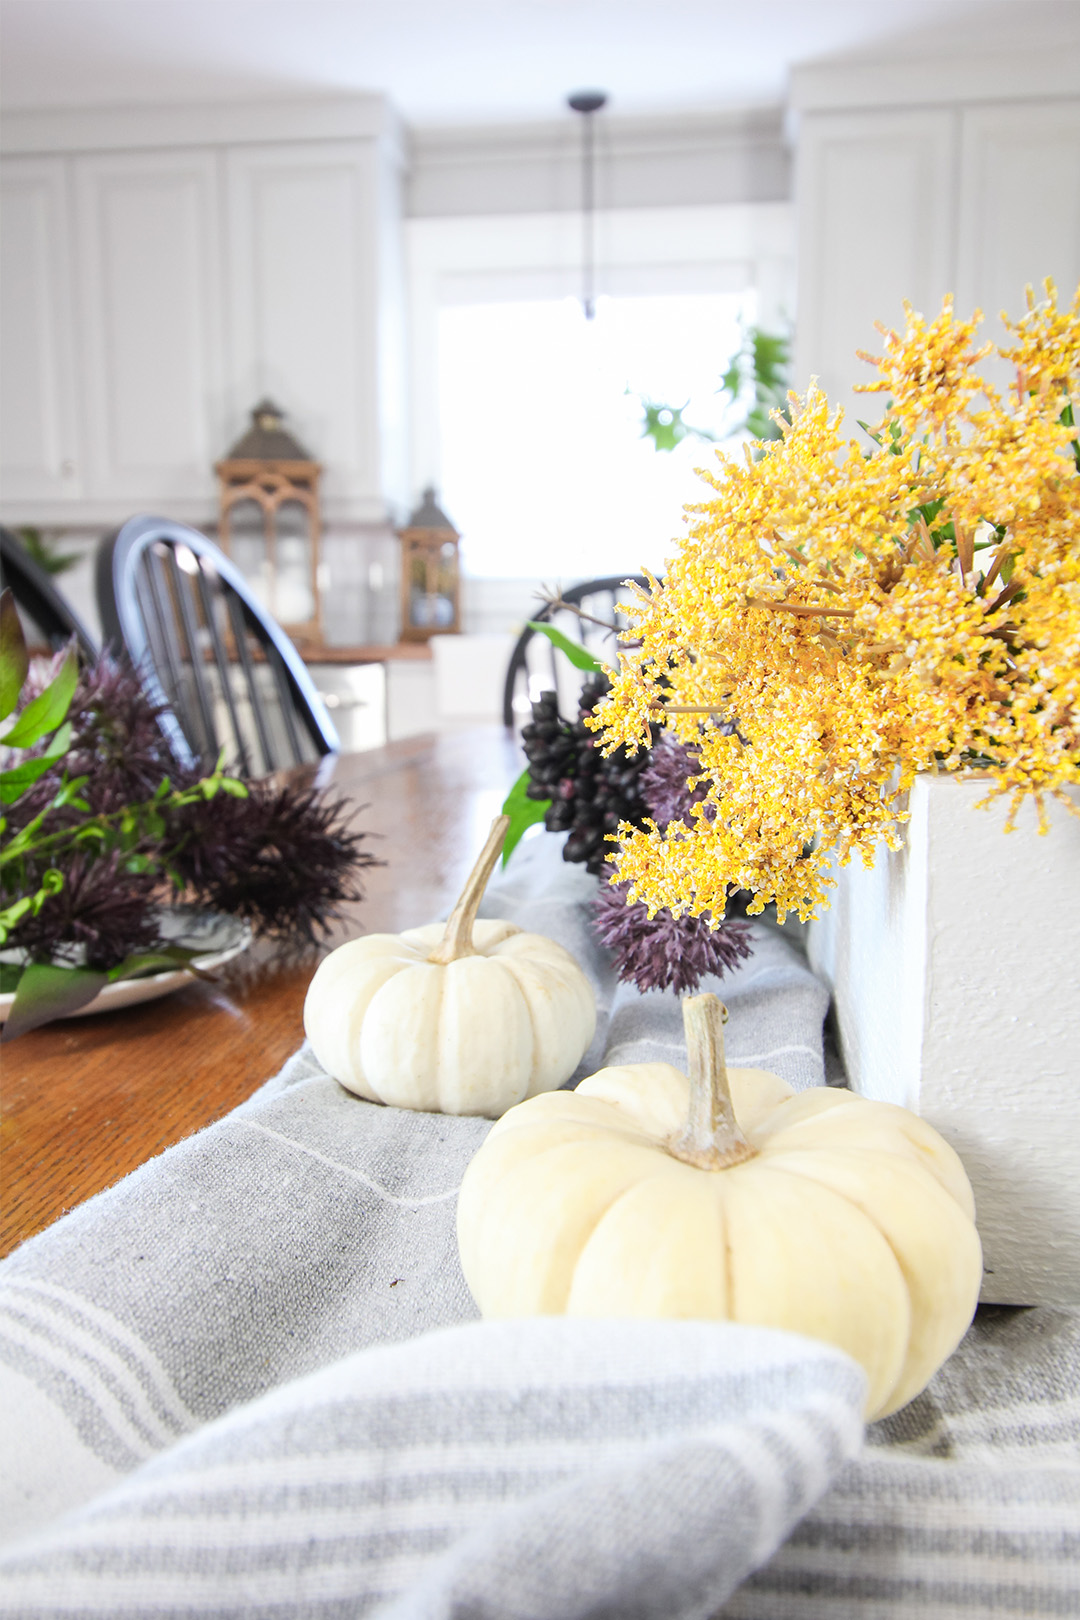 In this post I'll share details about our farmhouse style Thanksgiving table from our Canadian Thanksgiving holiday last weekend!